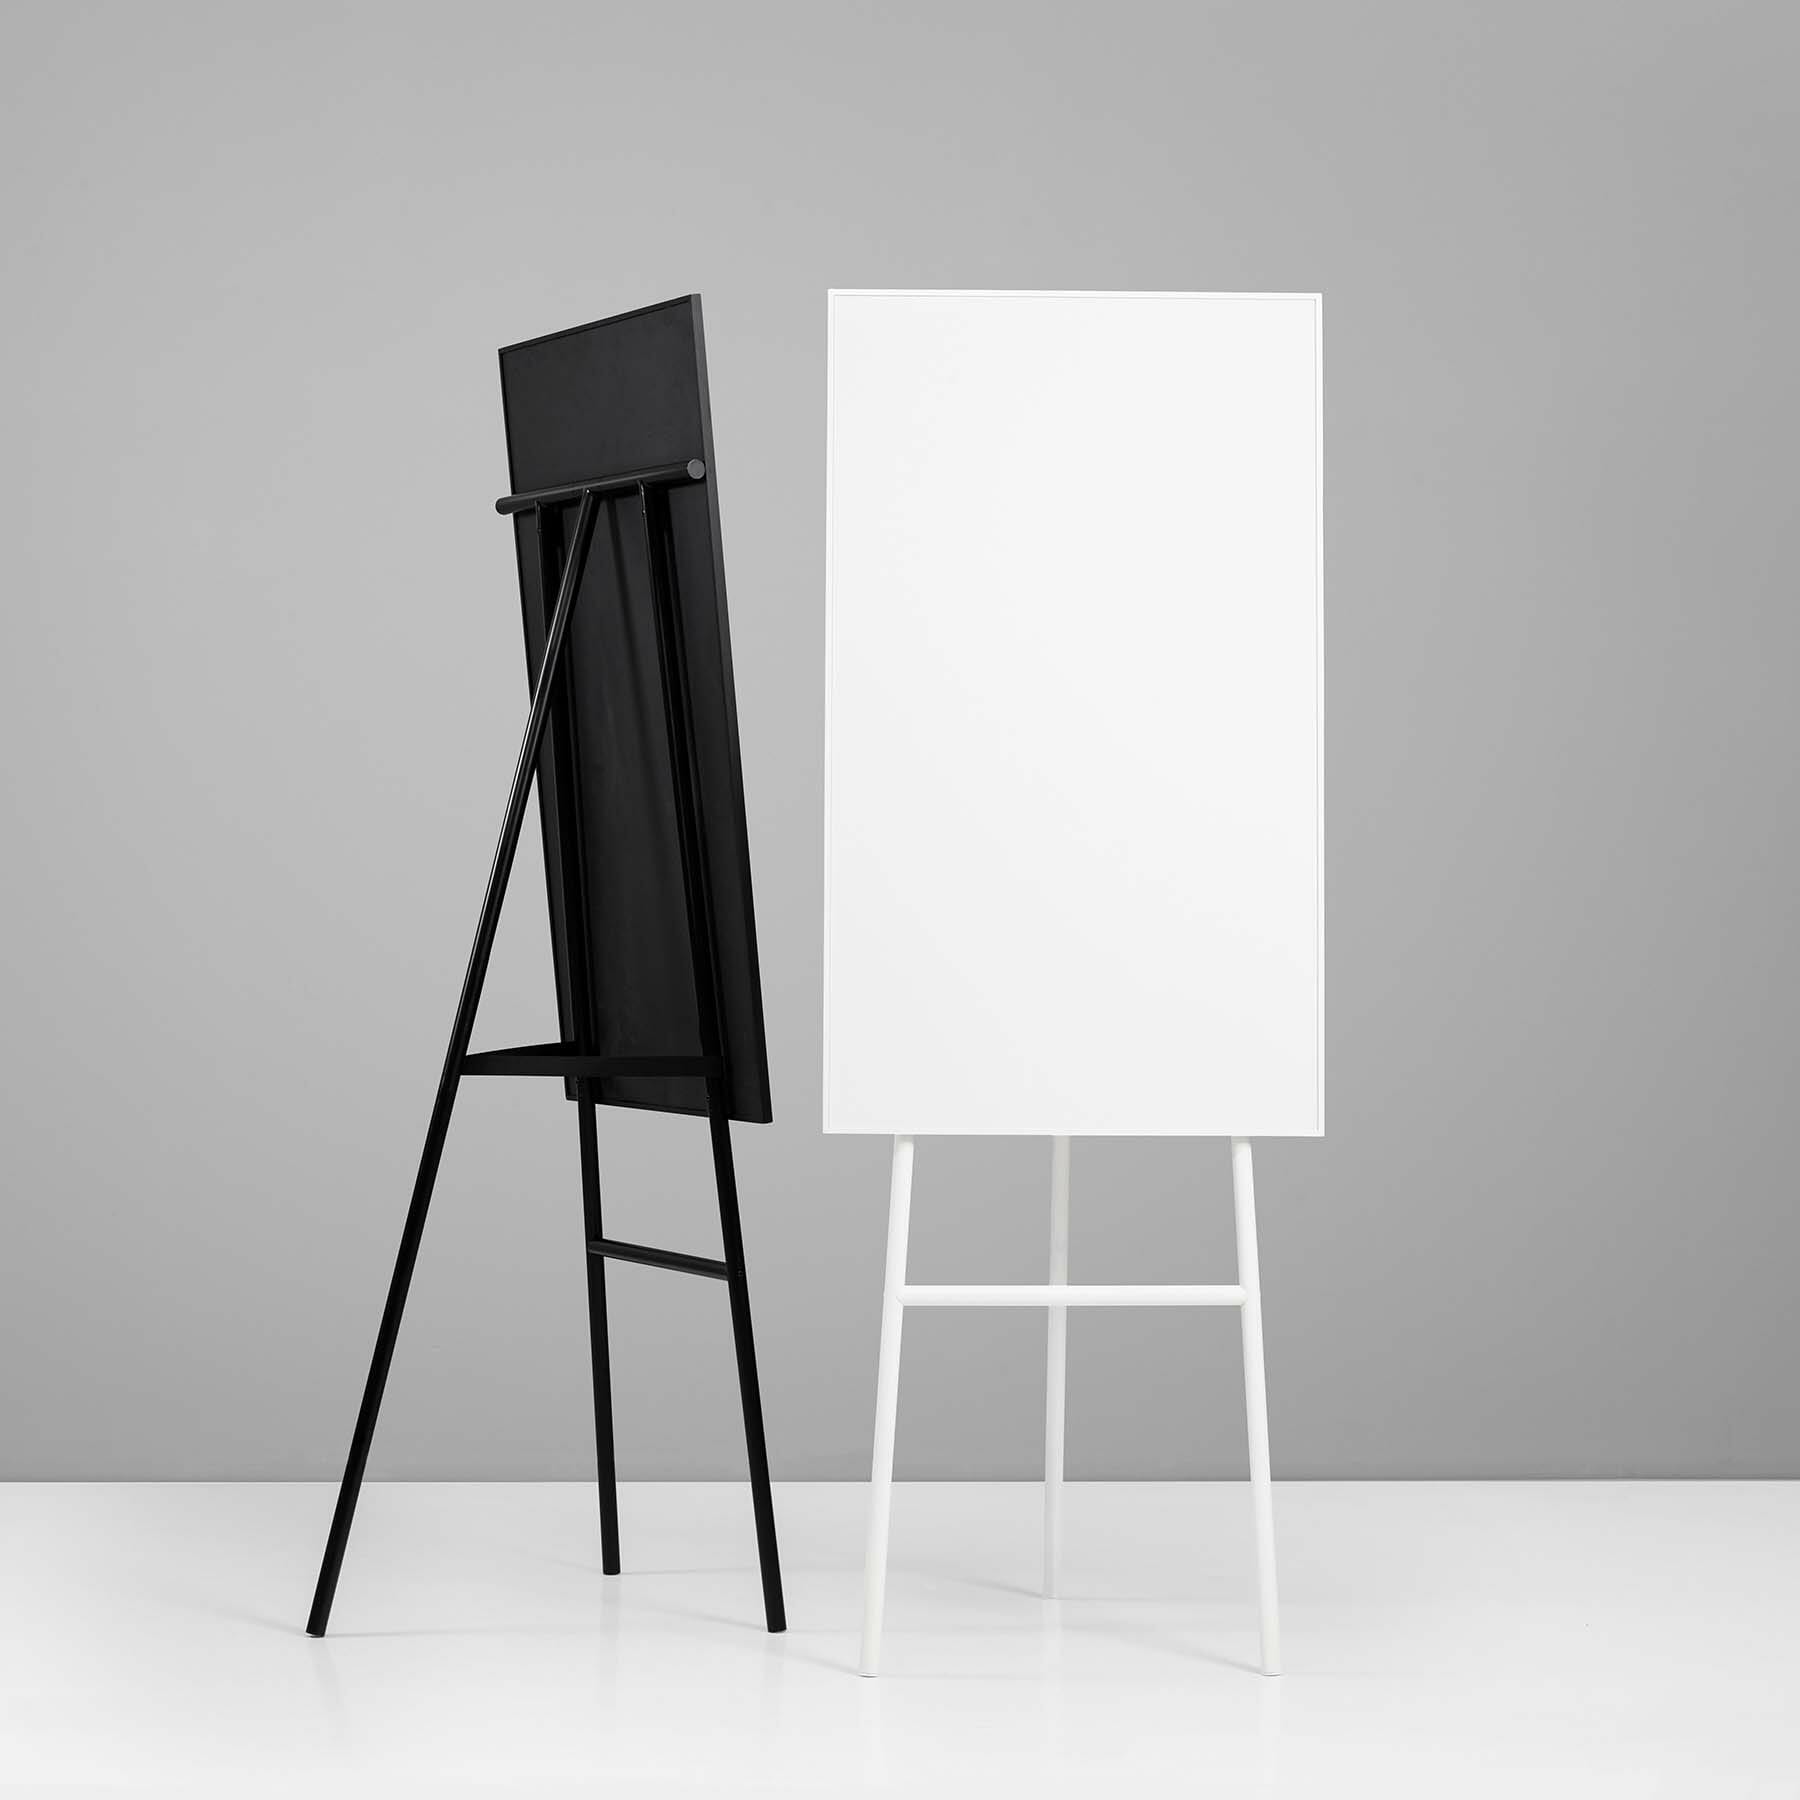 Lintex ONE flip chart easel In black or white | now! PATboard